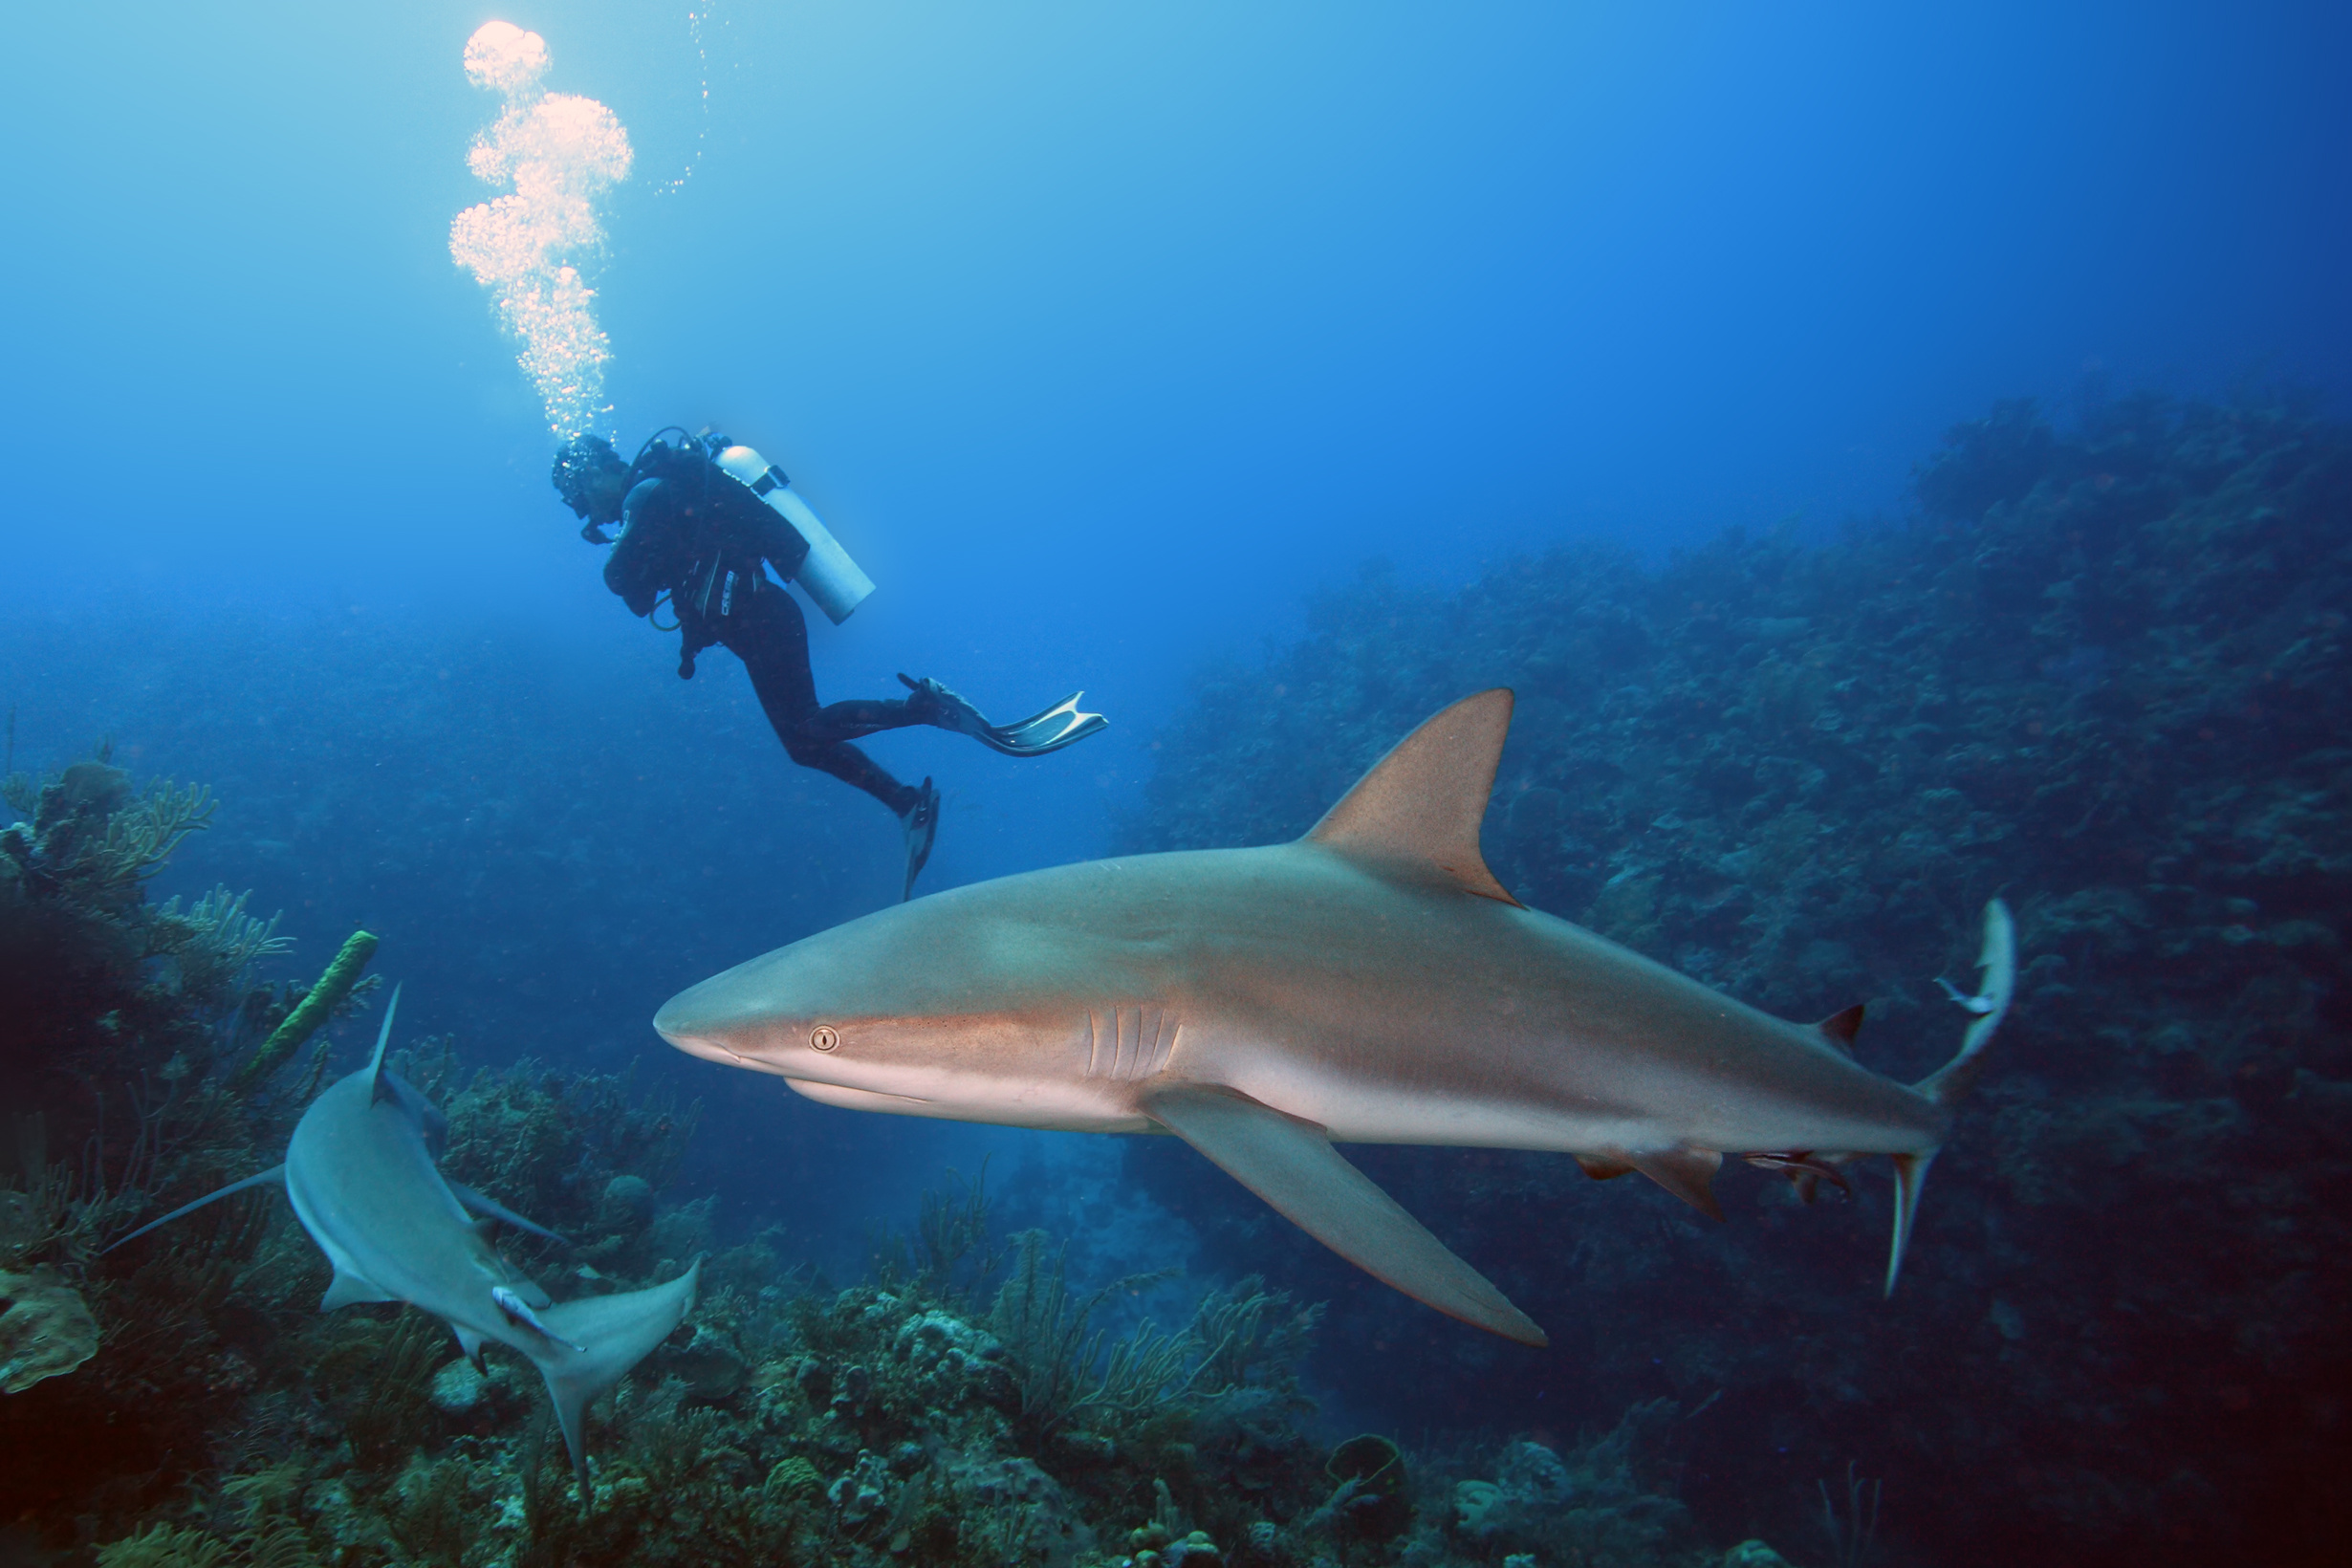 The Caribbean reef shark (Carcharhinus perezii) swims over reef in blue.